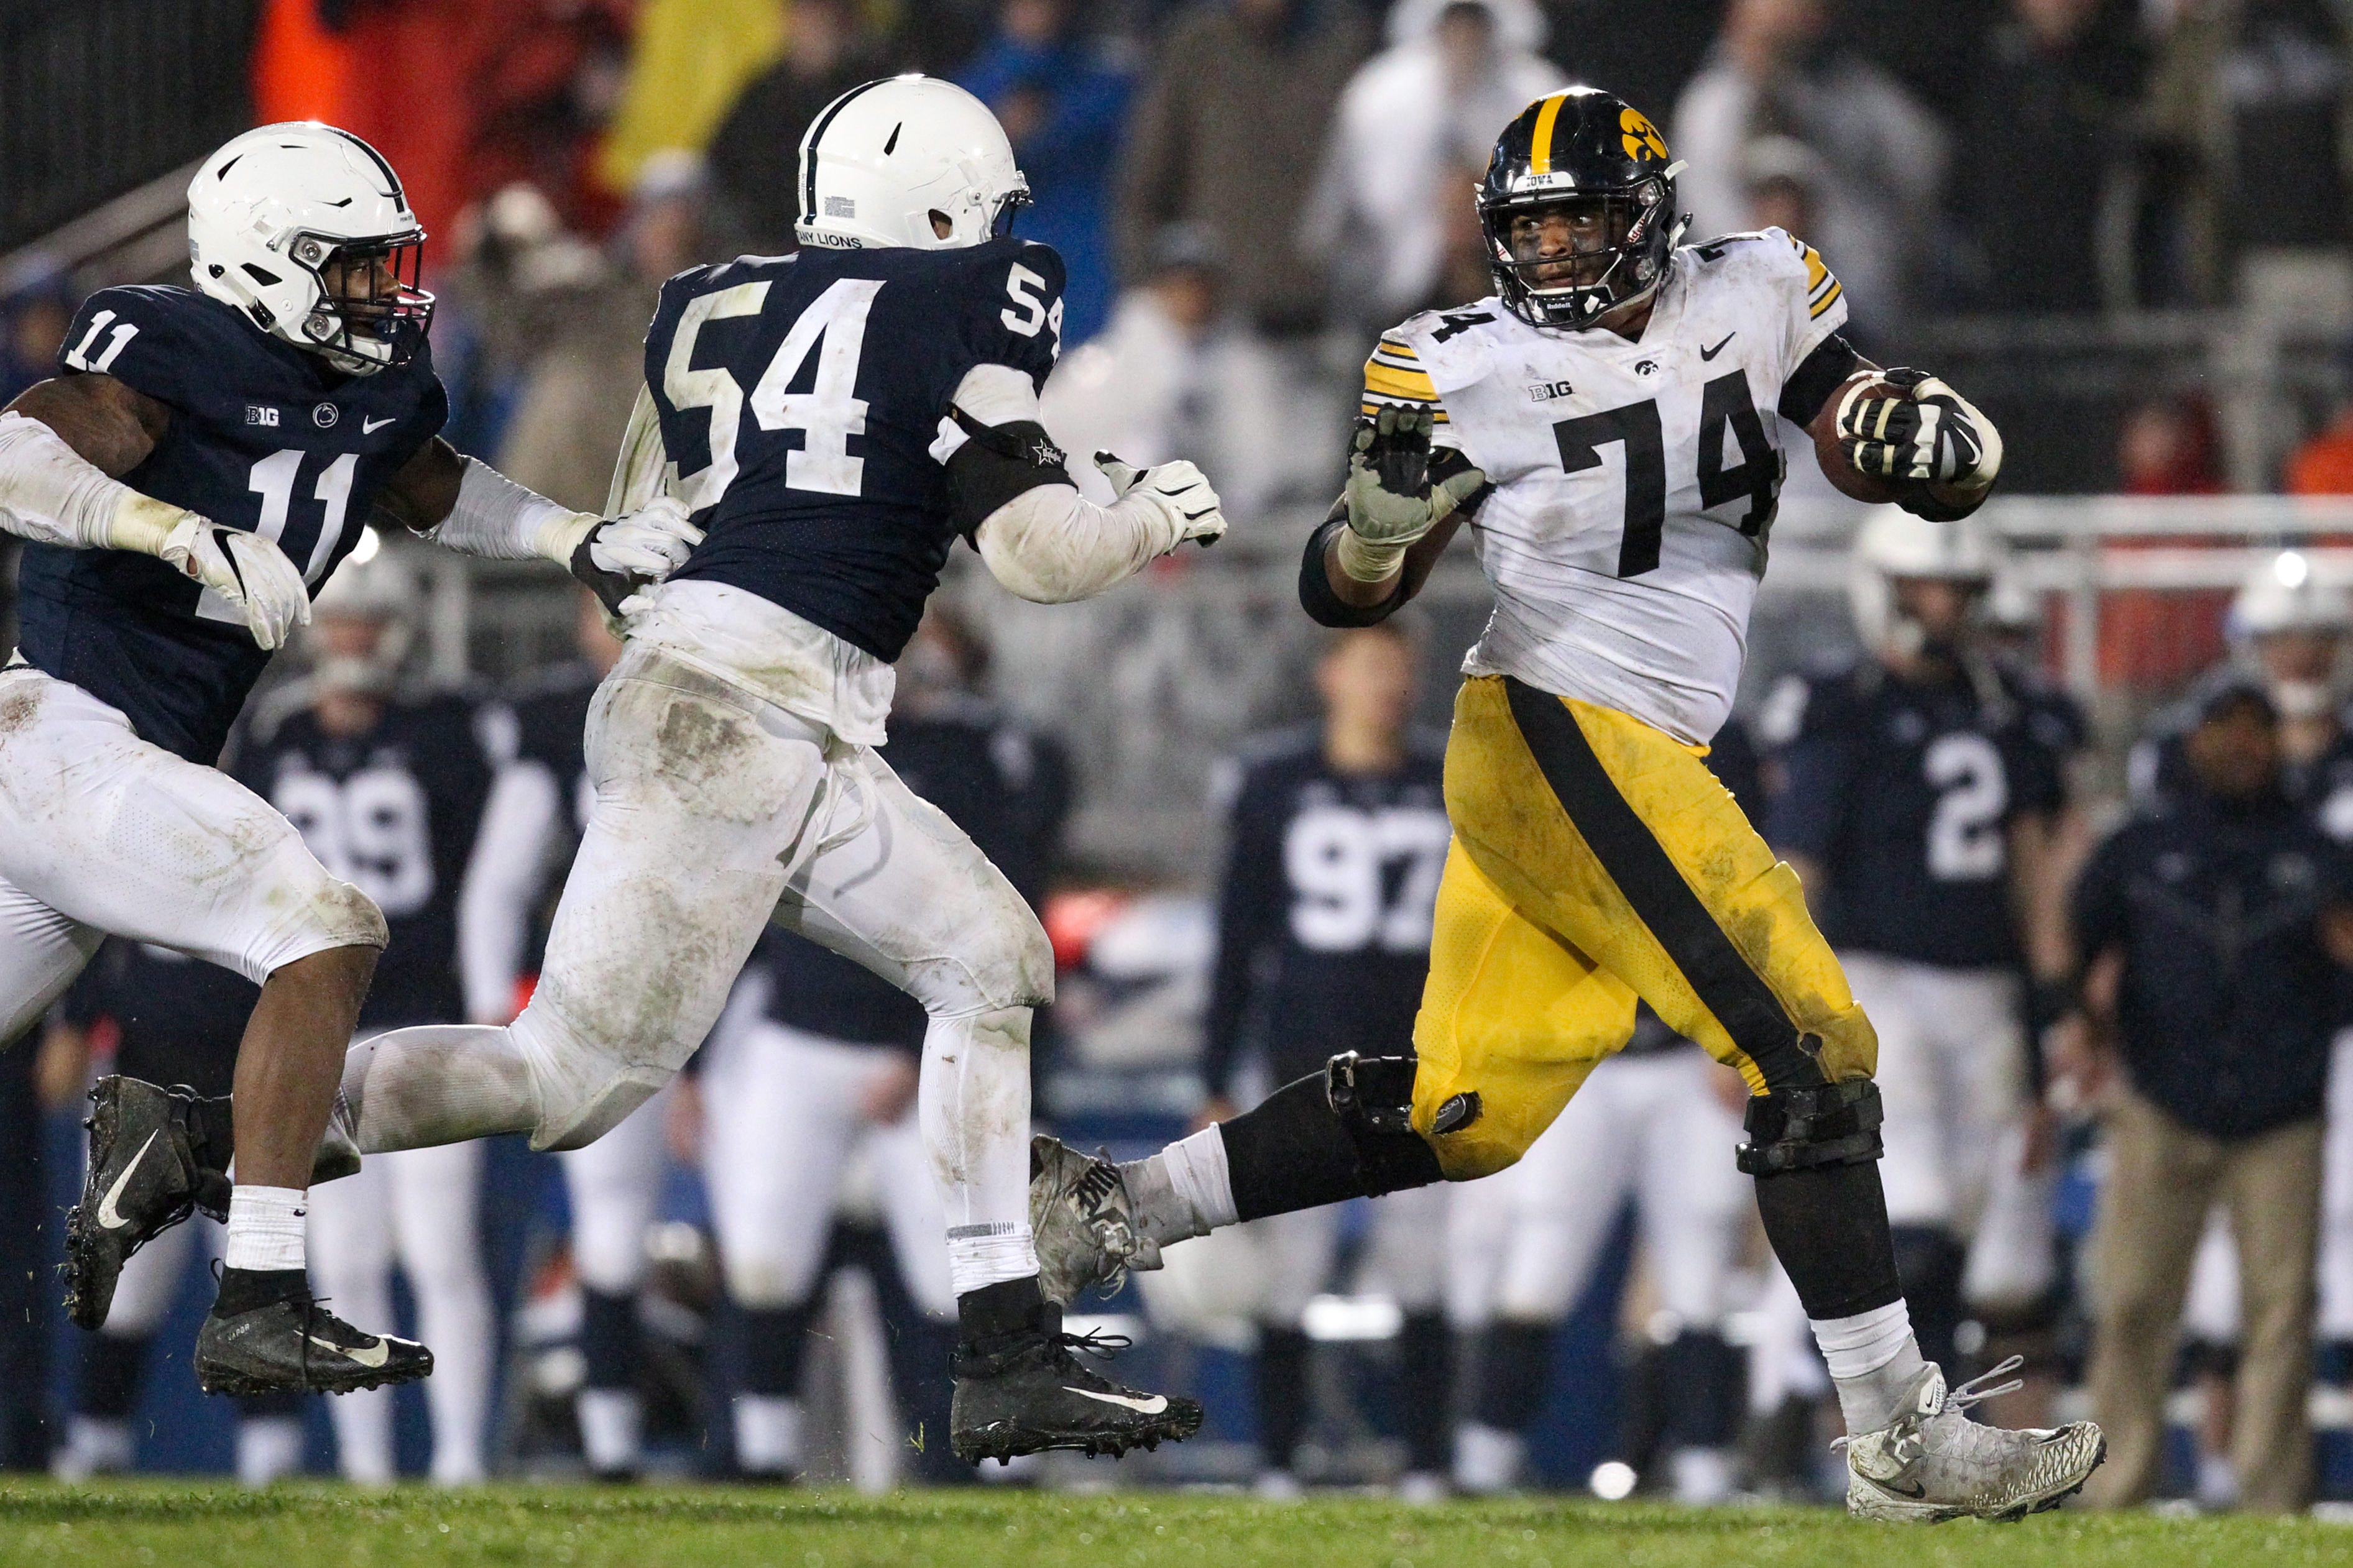 Oct 27, 2018; University Park, PA, USA; Iowa Hawkeyes offensive linesmen Tristan Wirfs (74) runs with the ball during the fourth quarter against the Penn State Nittany Lions at Beaver Stadium. Penn State defeated Iowa 30-24. Mandatory Credit: Matthew O'Haren-USA TODAY Sports